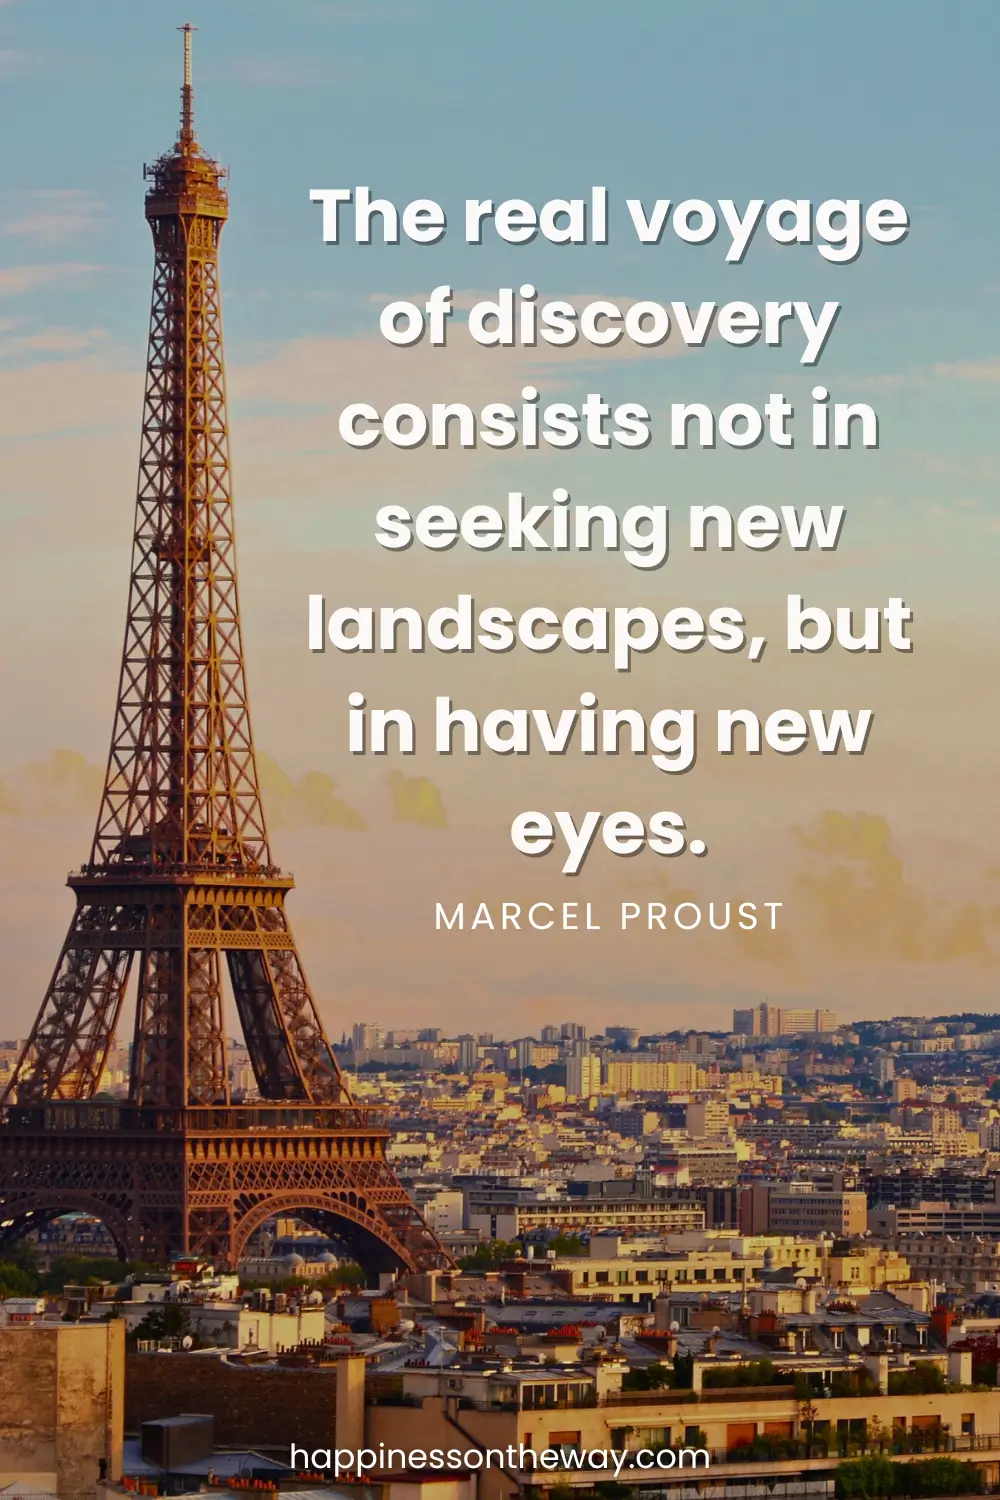 The Eiffel Tower stands tall against the Parisian cityscape, with the quote 'The real voyage of discovery consists not in seeking new landscapes, but in having new eyes. – Marcel Proust